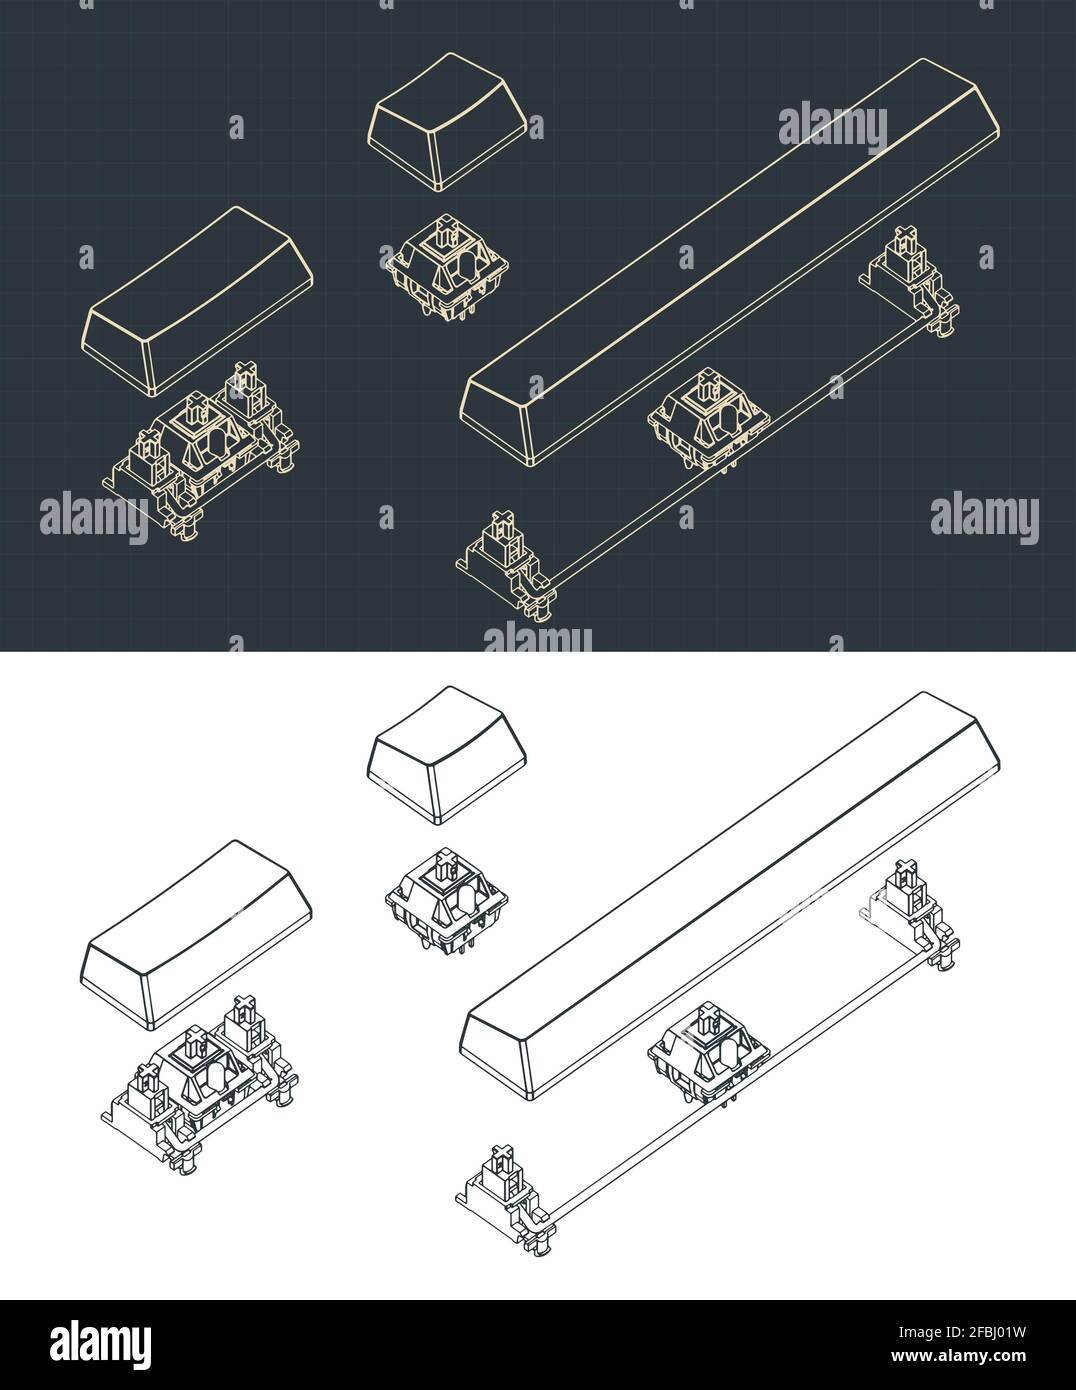 Stylized vector illustration of a mechanical keyboard part. Switches with removed keycaps and stabilizers drawing Stock Vector